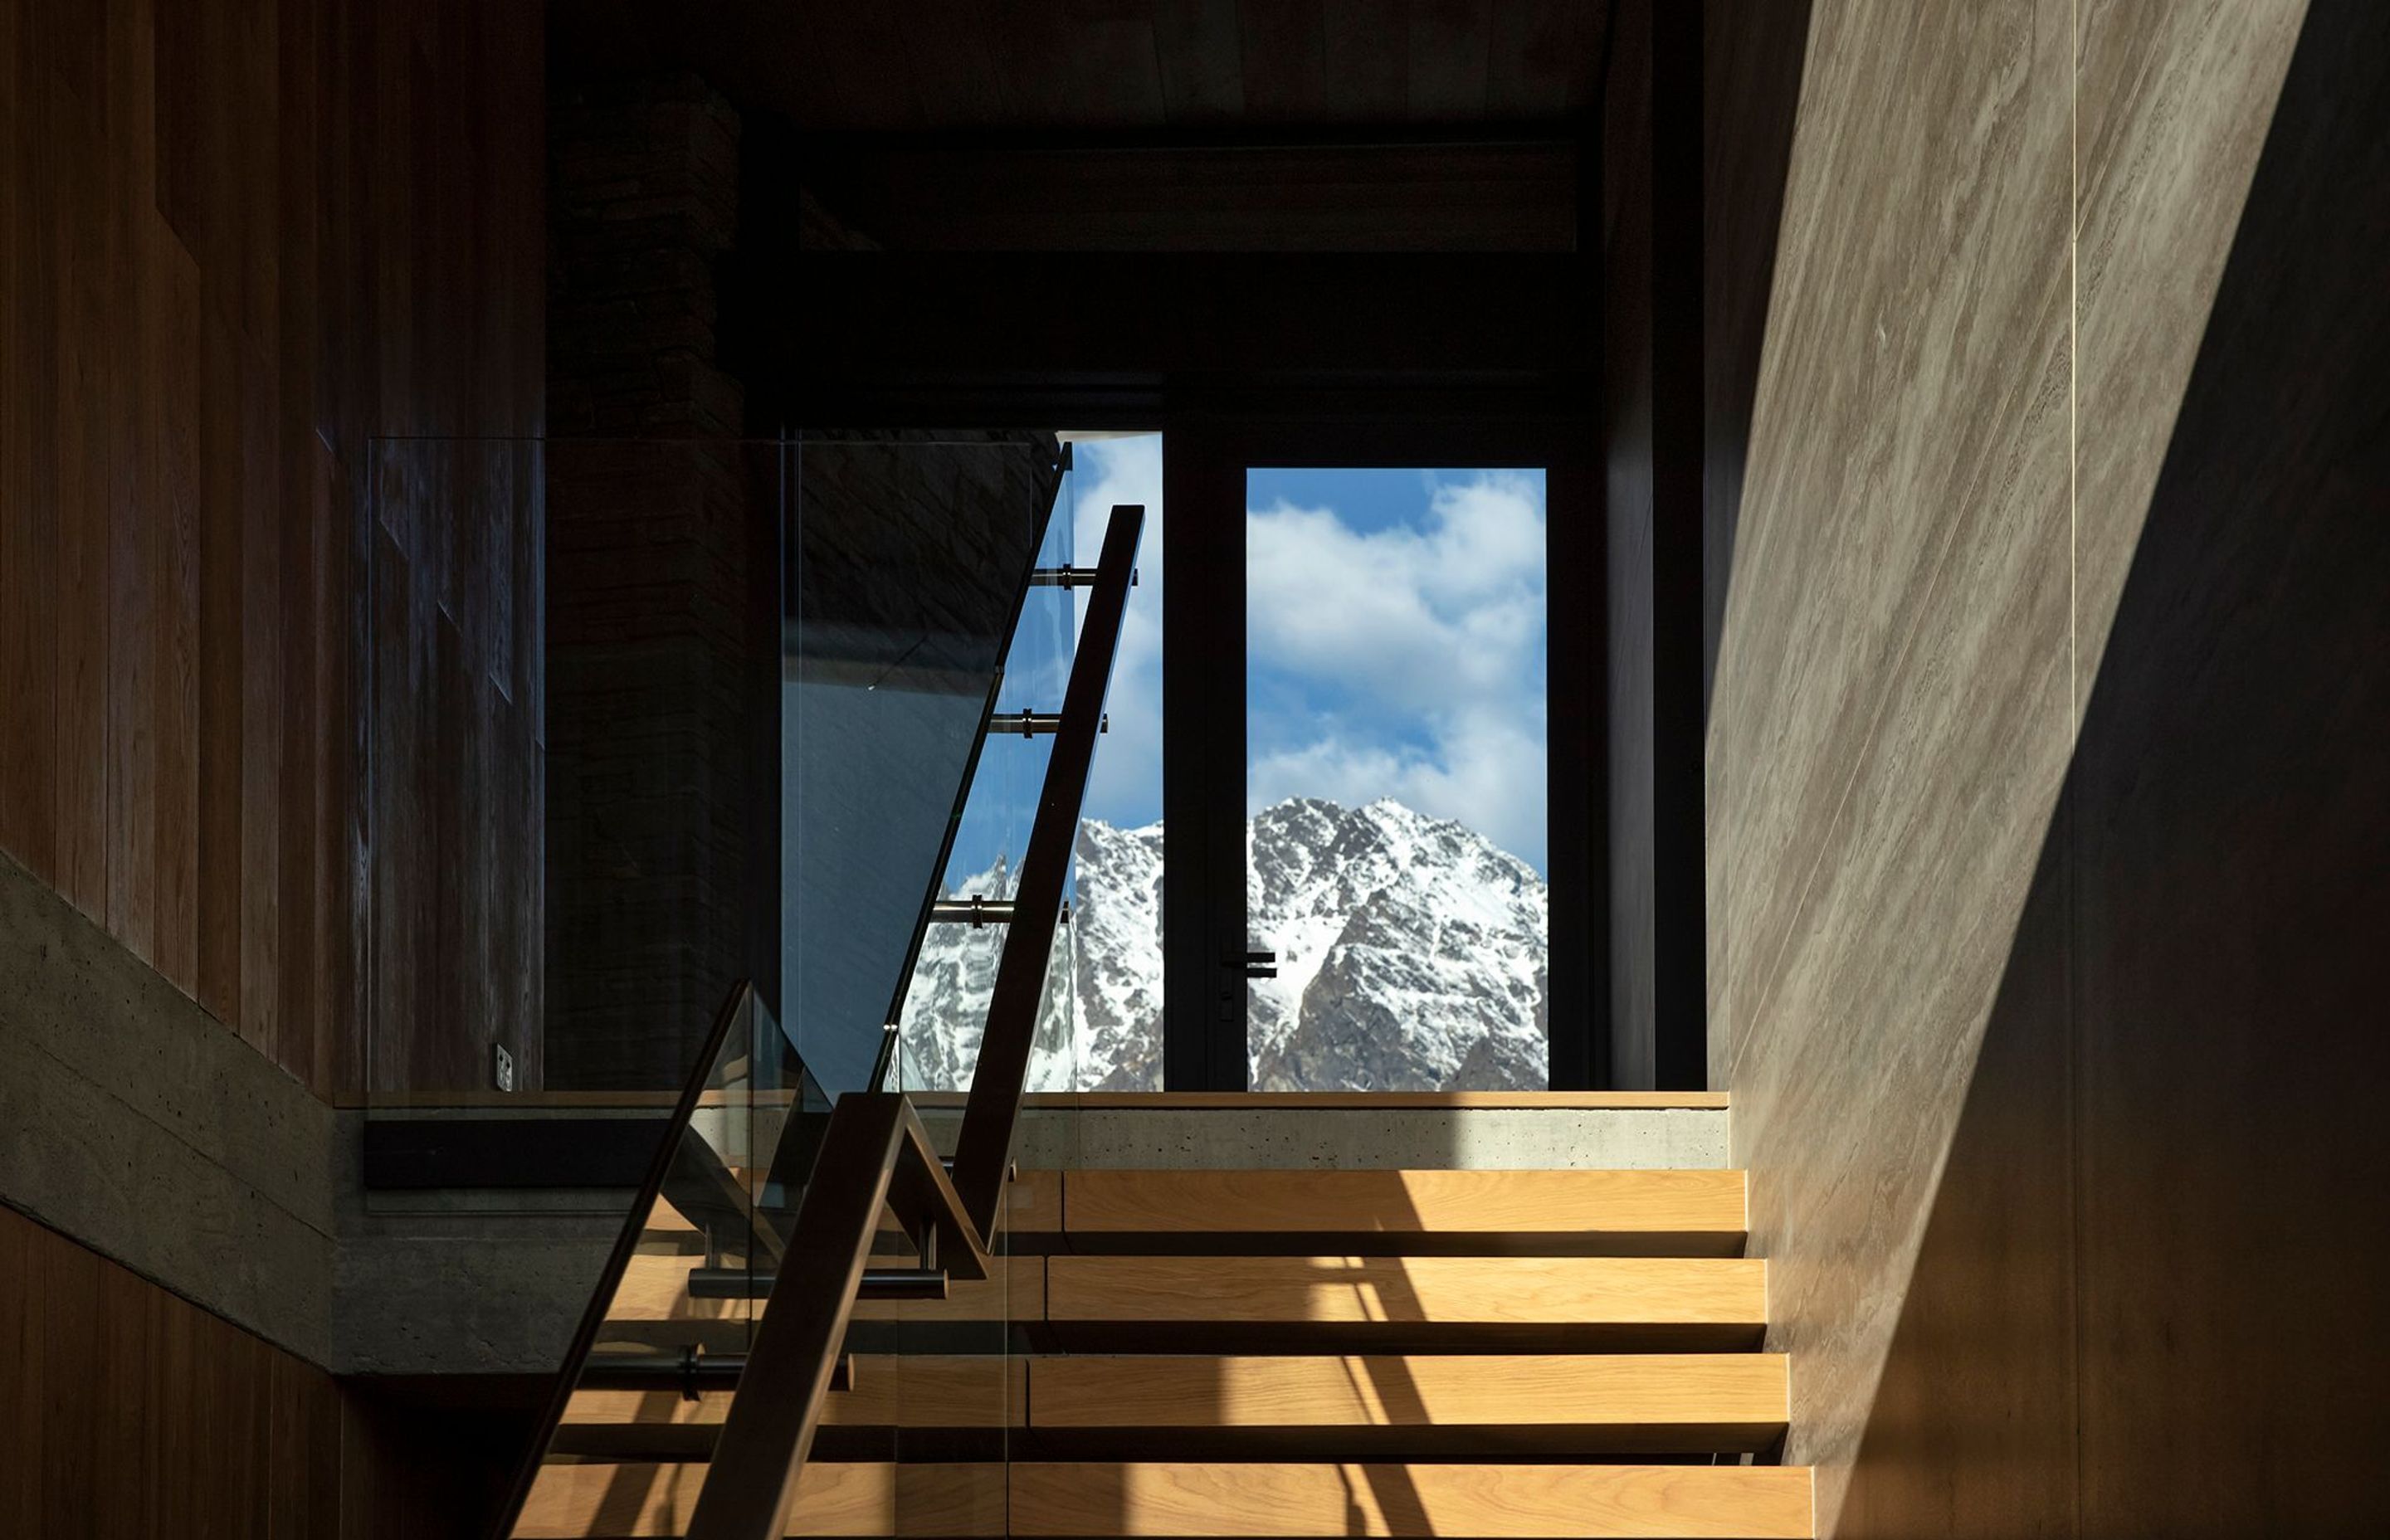 Floor-to-ceiling glazing at the top of the stairs reveals a view of The Remarkables, The staircase features matt-finished travertine panelling. Photograph: Simon Devitt.